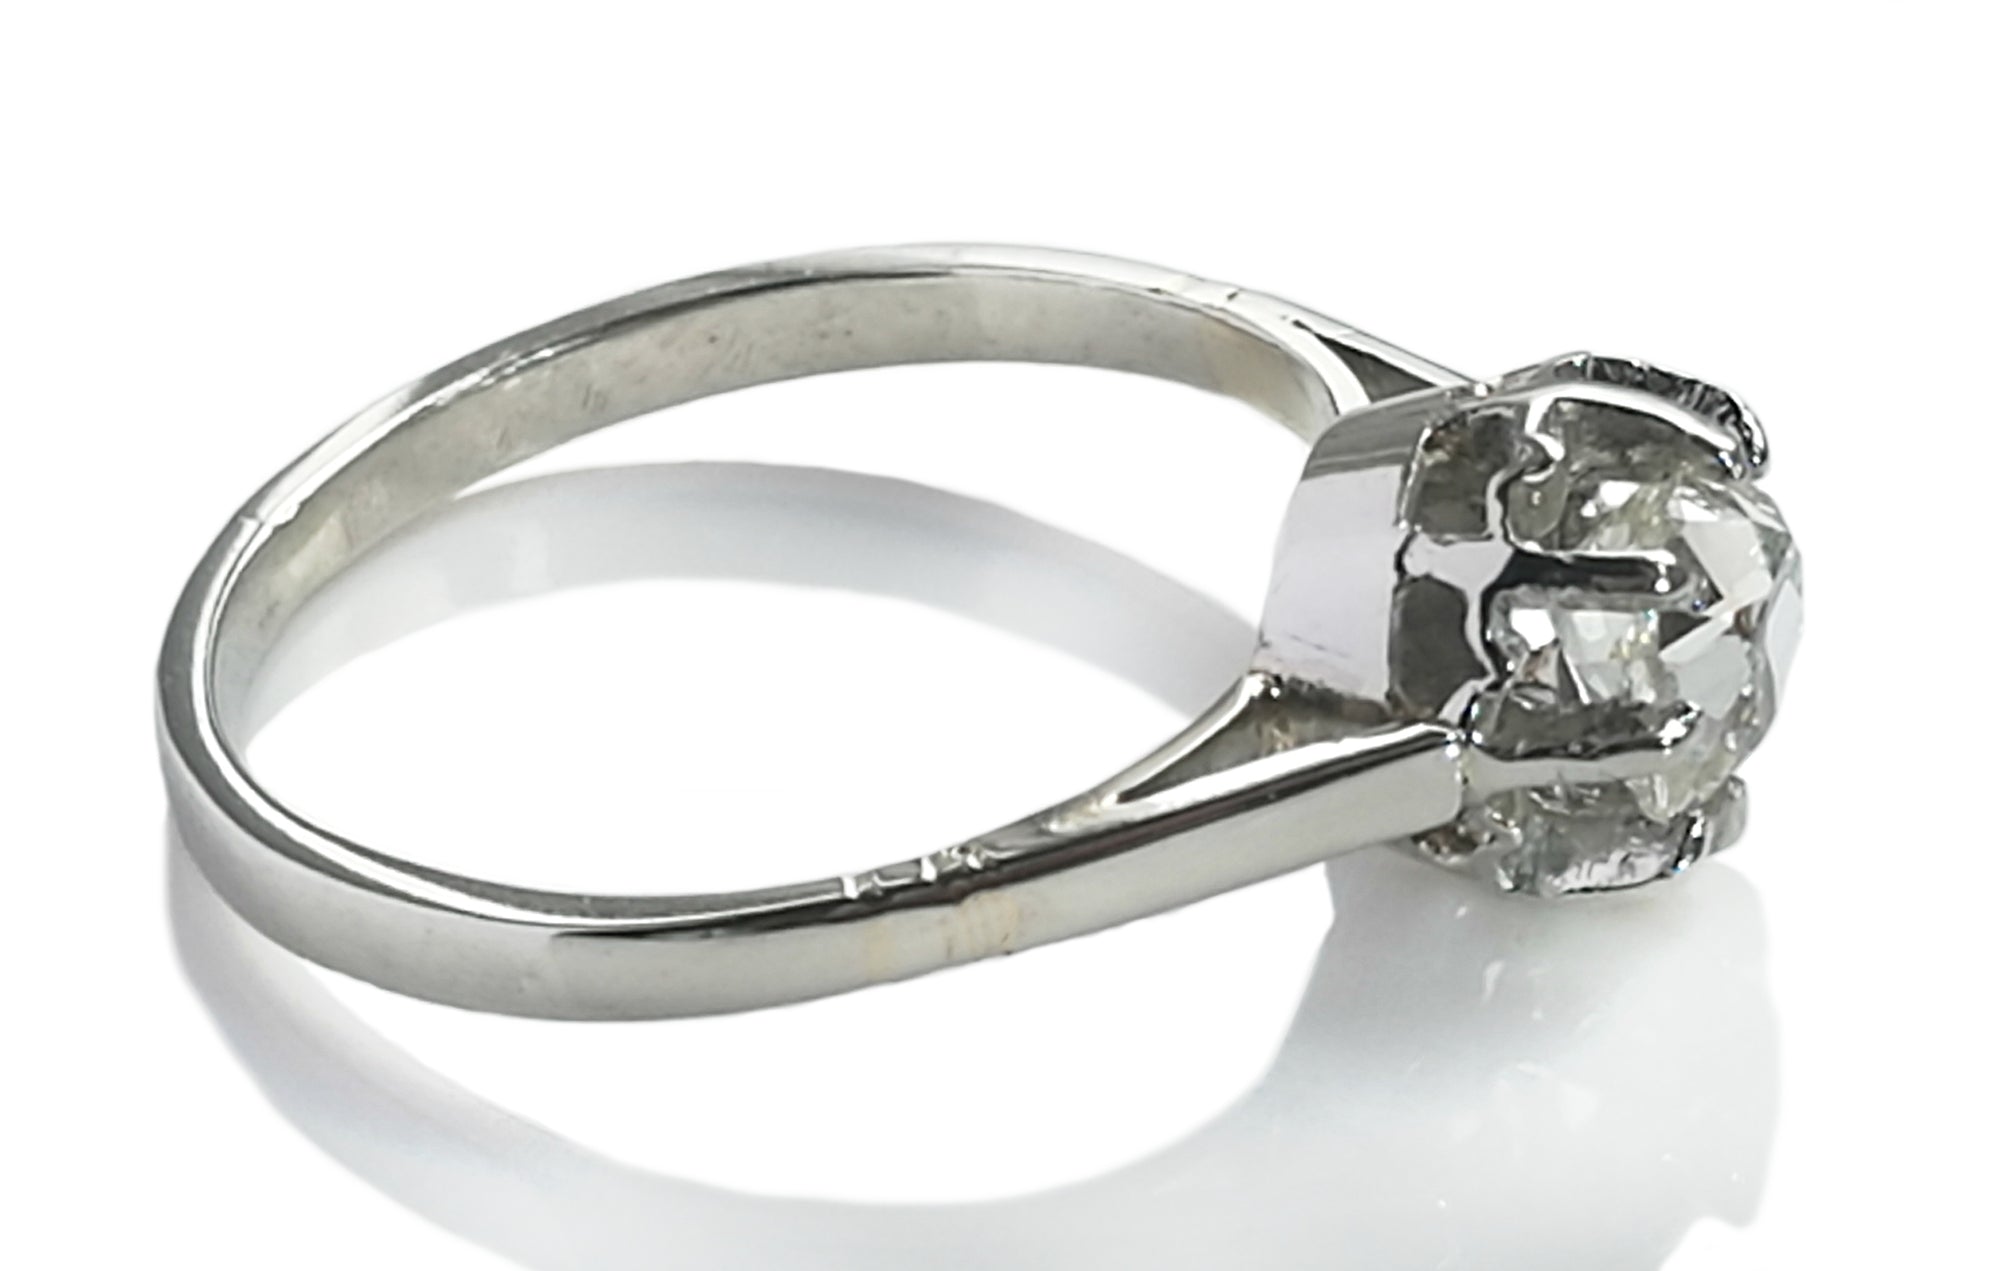 Antique French 0.72ct Old Mine Cut Sustainable Diamond Engagement Ring in Platinum